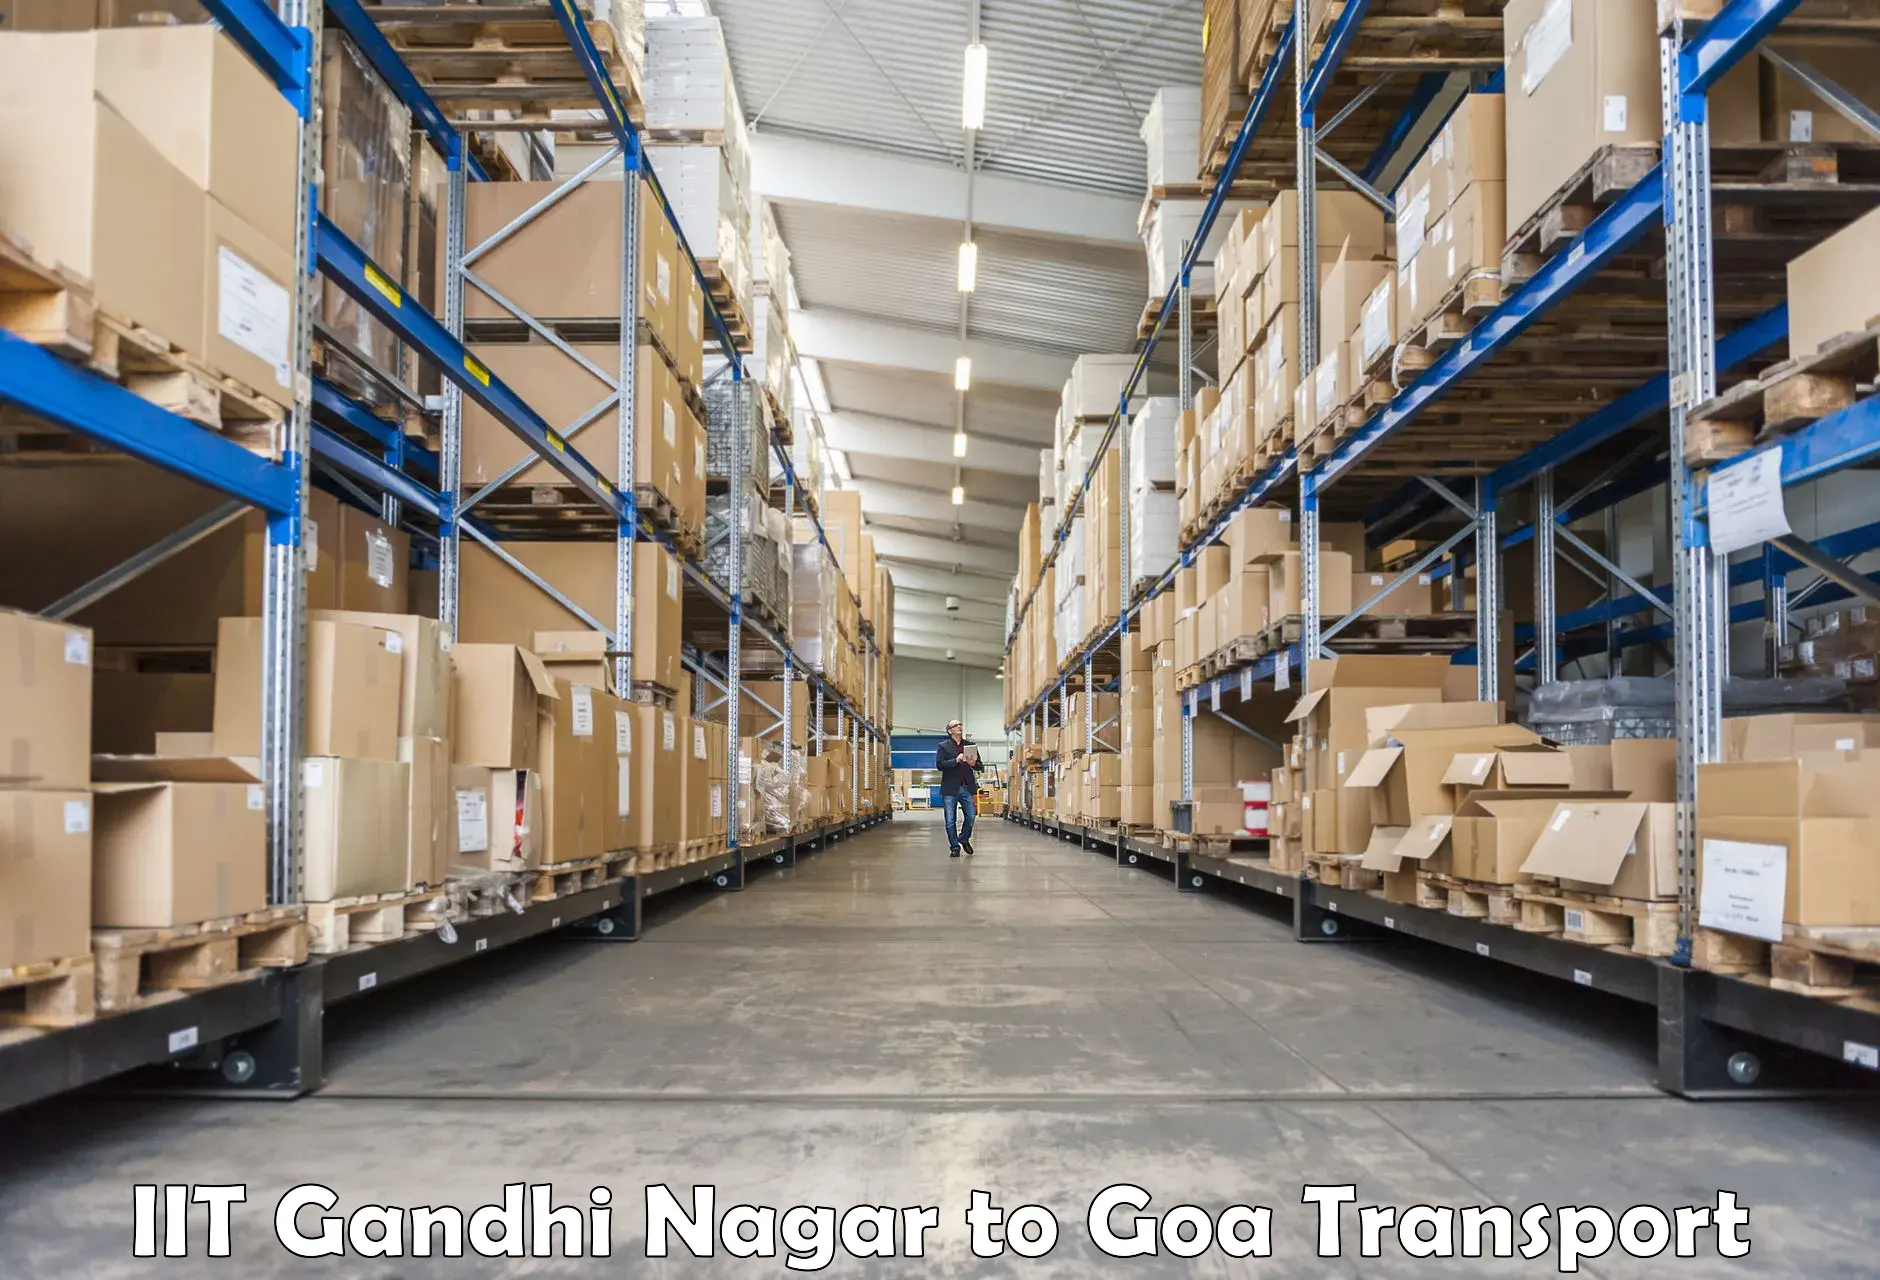 Transport bike from one state to another IIT Gandhi Nagar to Bardez